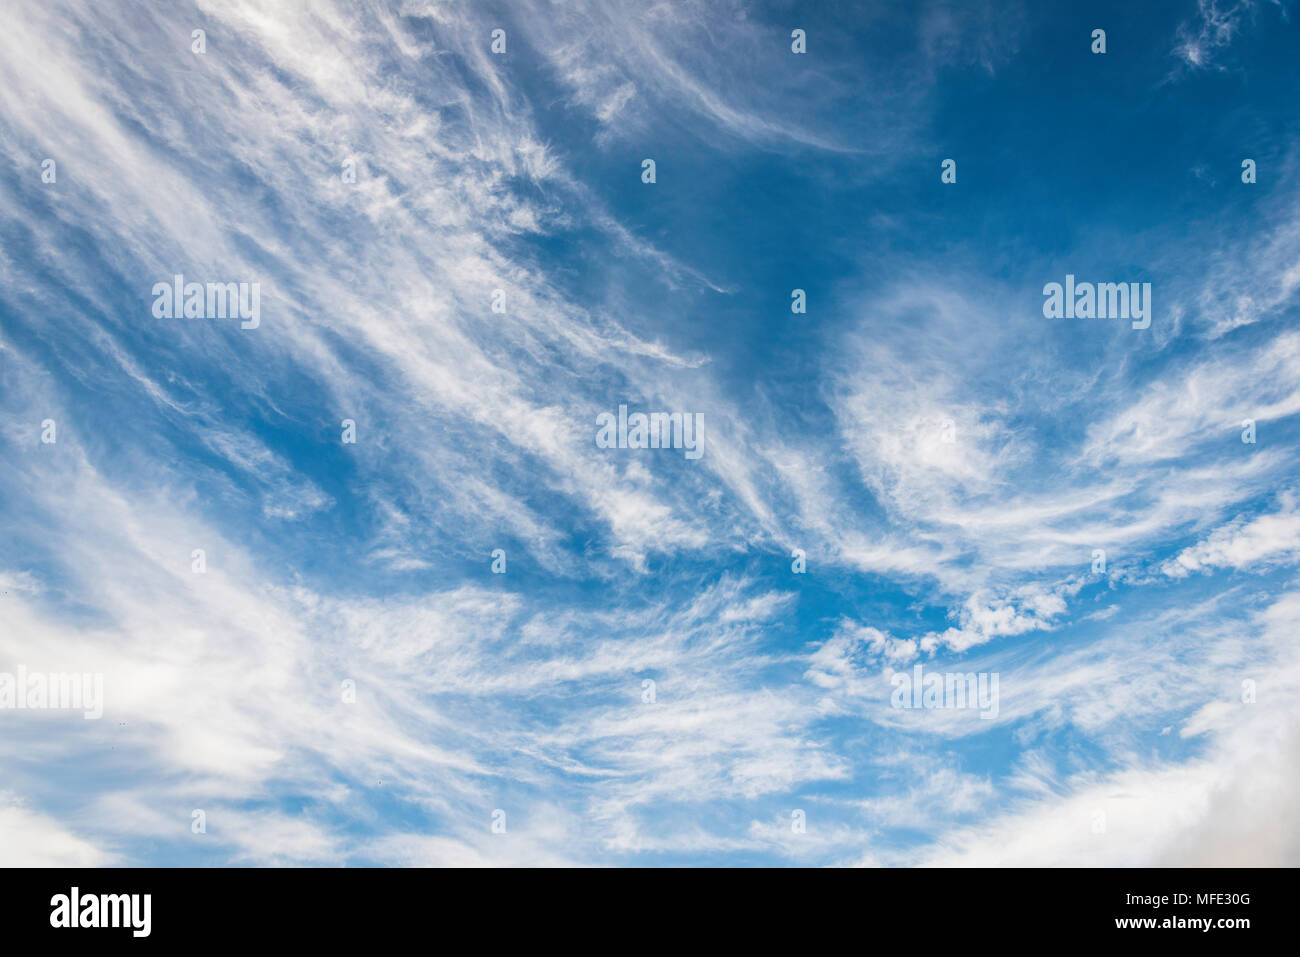 Blue sky with clouds, cirrus clouds, fair weather clouds, good weather Stock Photo